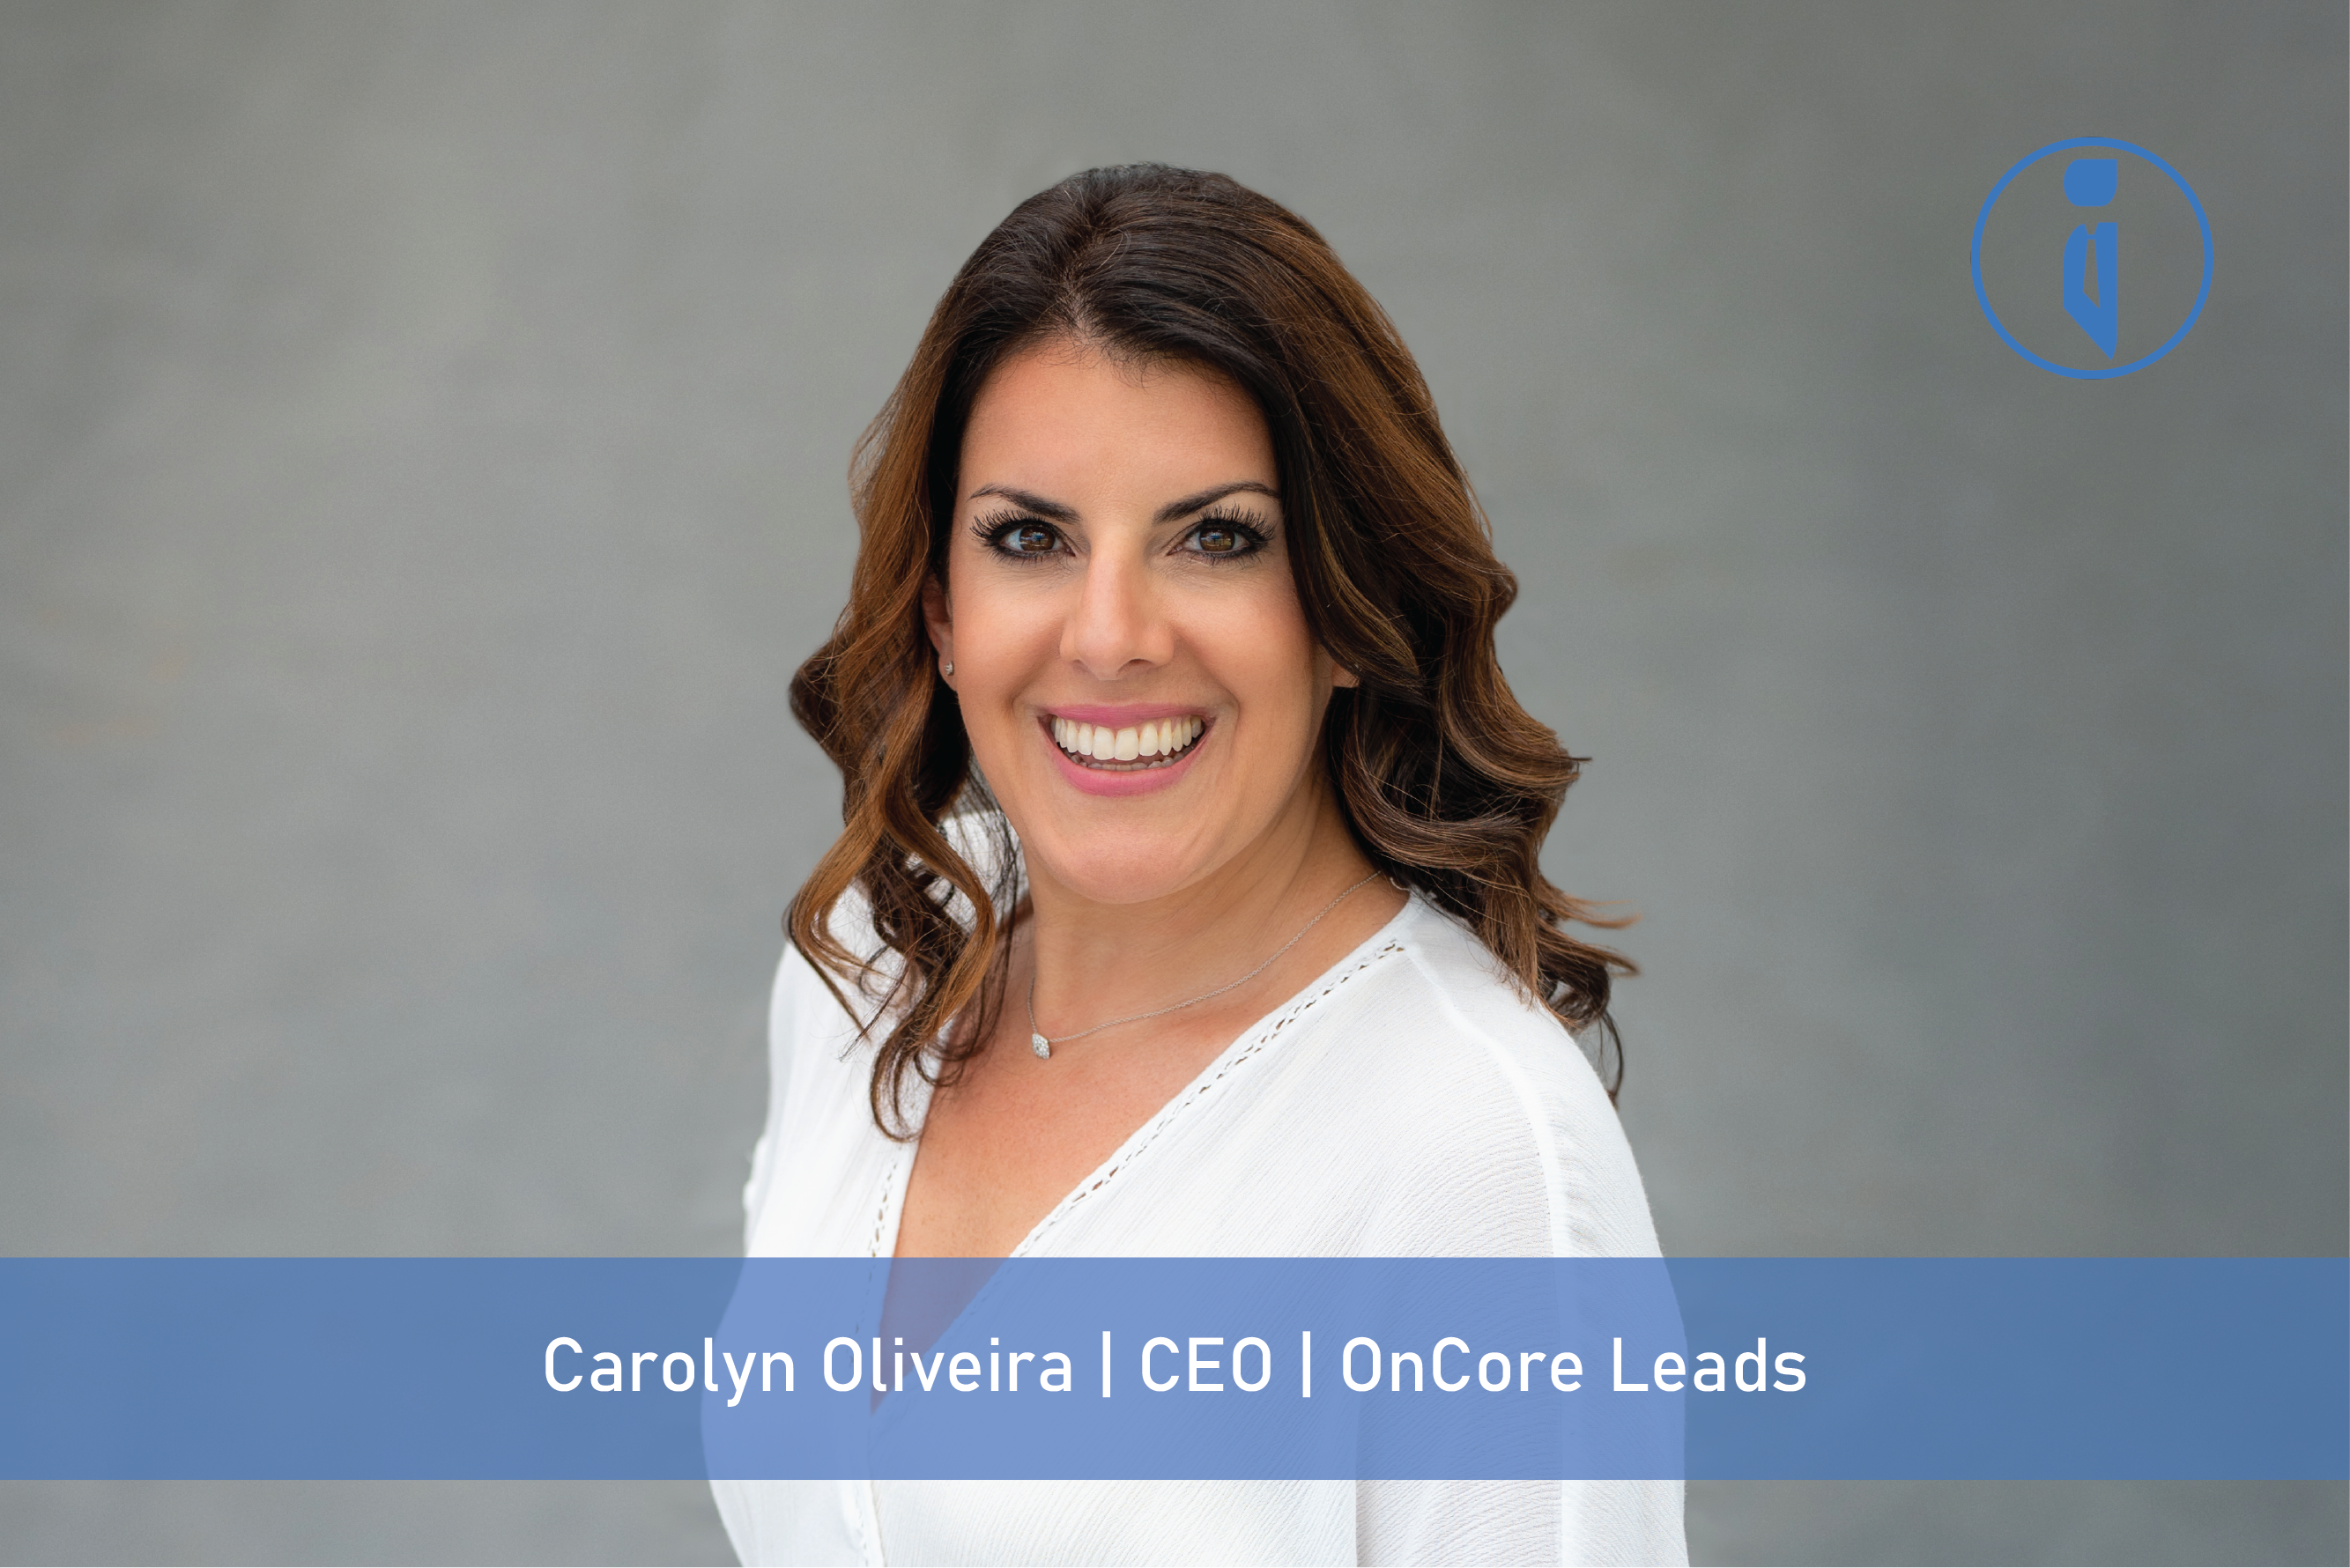 OnCore Leads: Known for Delivering High Quality Leads on Time and on Budget